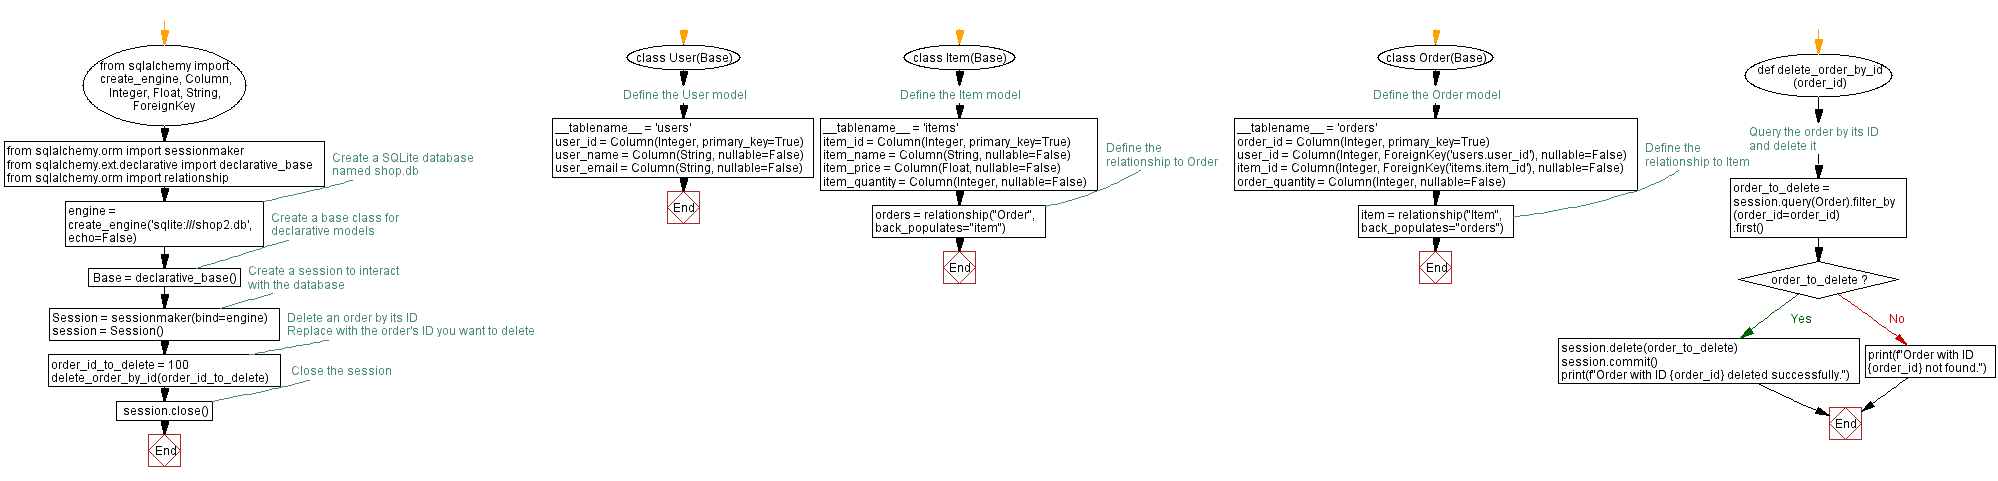 Flowchart: Delete order from Order table using SQLAlchemy.